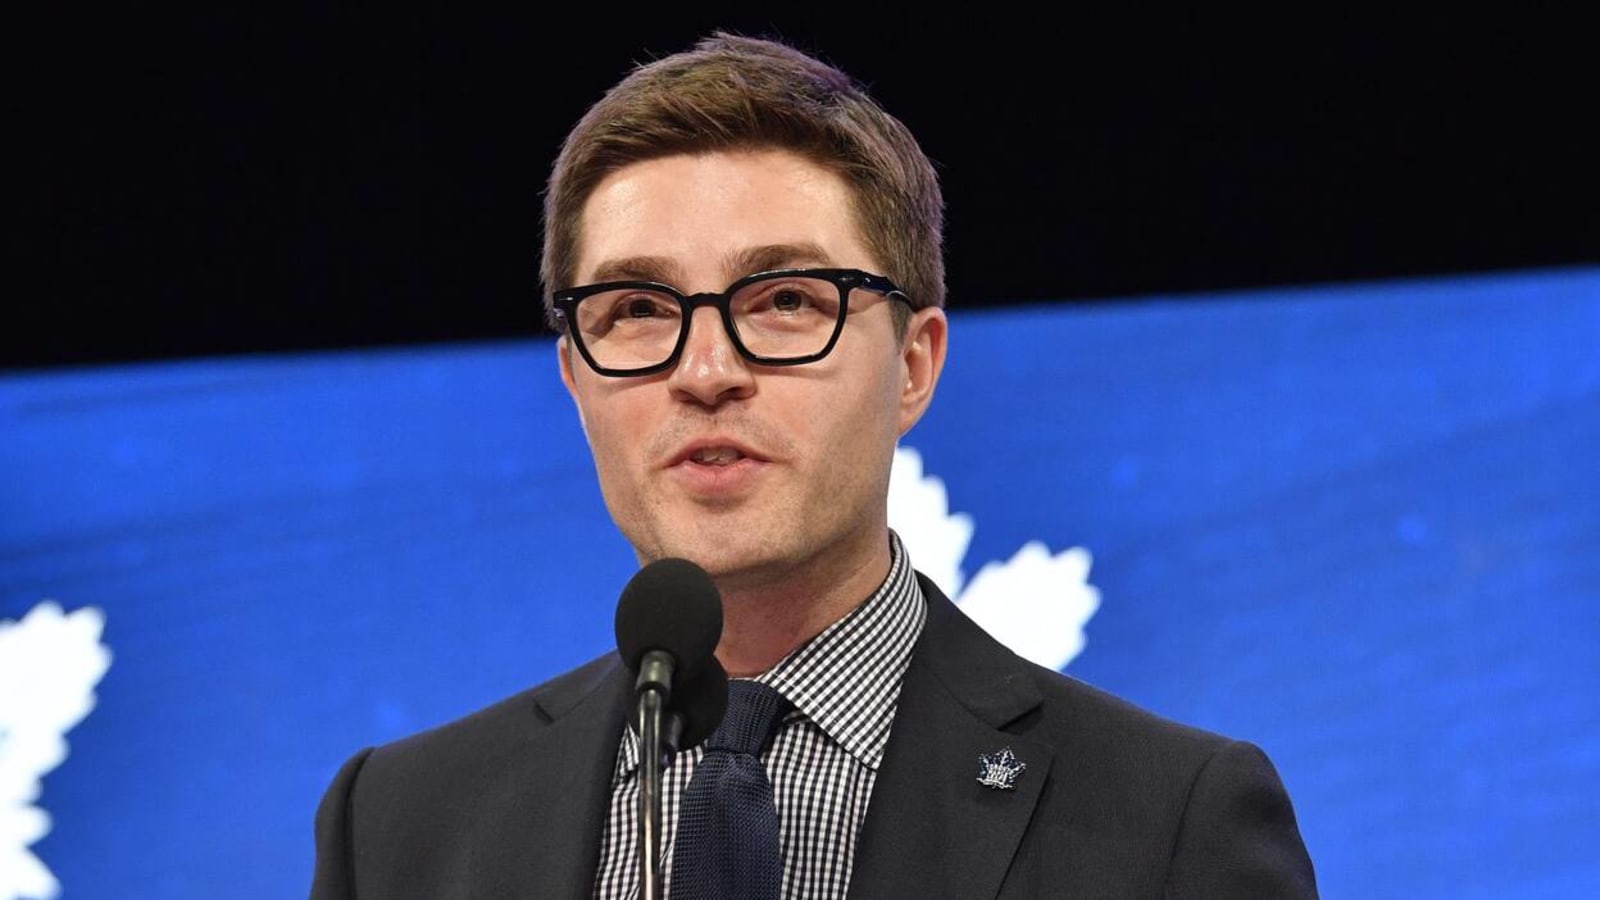 Leafs president reveals what led to Kyle Dubas' departure